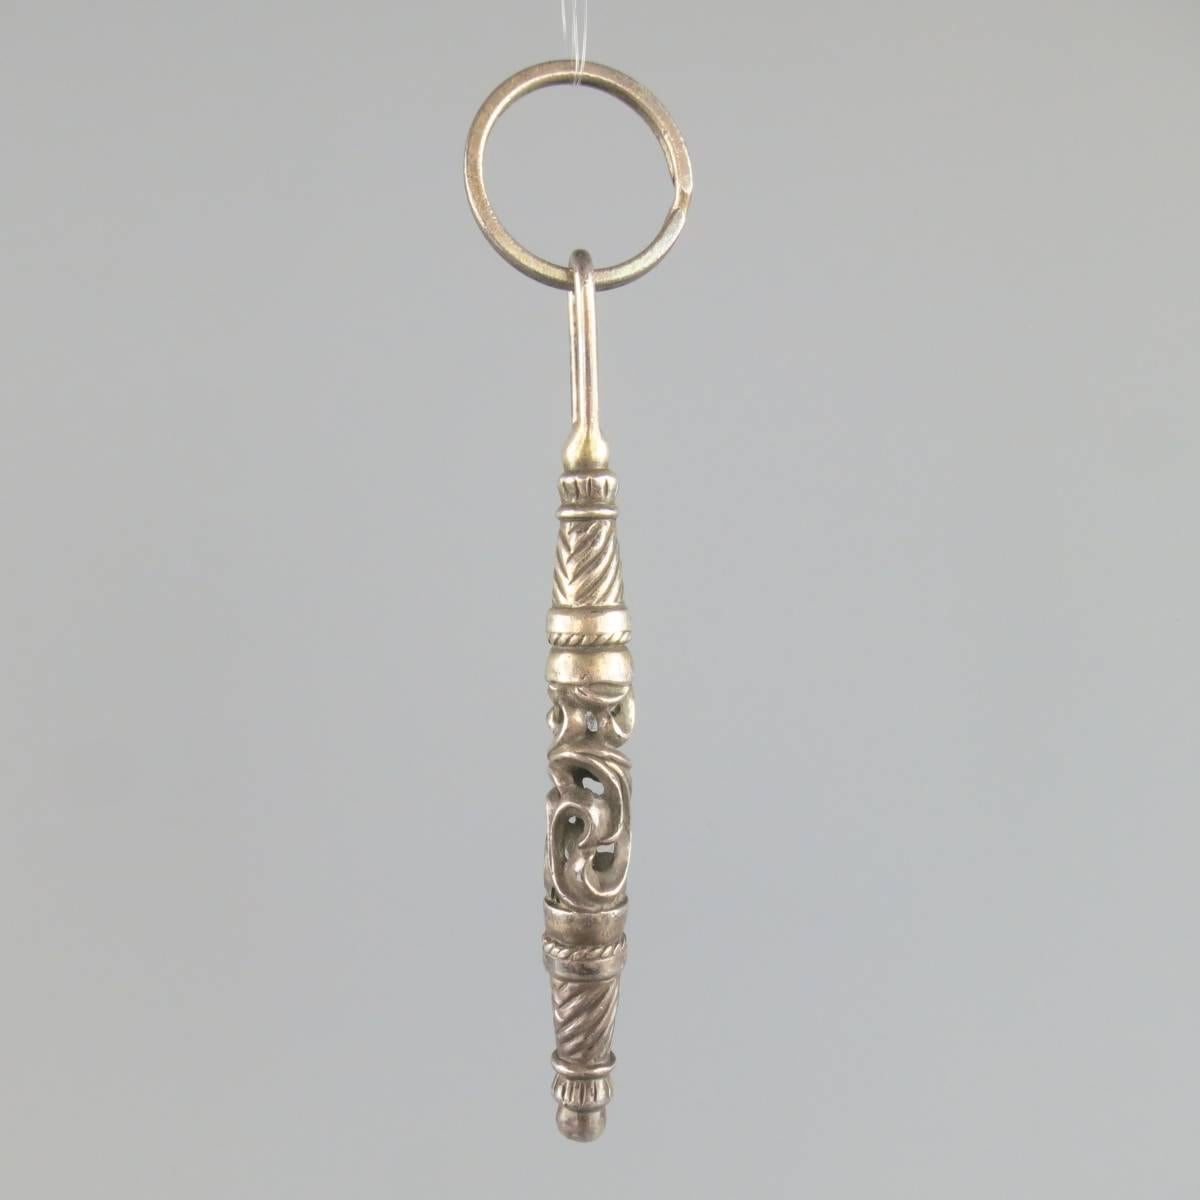 CHROME HEARTS keychain in sterling silver featuring a long engraved wand on a hoop. Tarnishing throughout.
 
Good Pre-Owned Condition.
 
Wand:11 cm x 1 cm


Web ID: 81361 